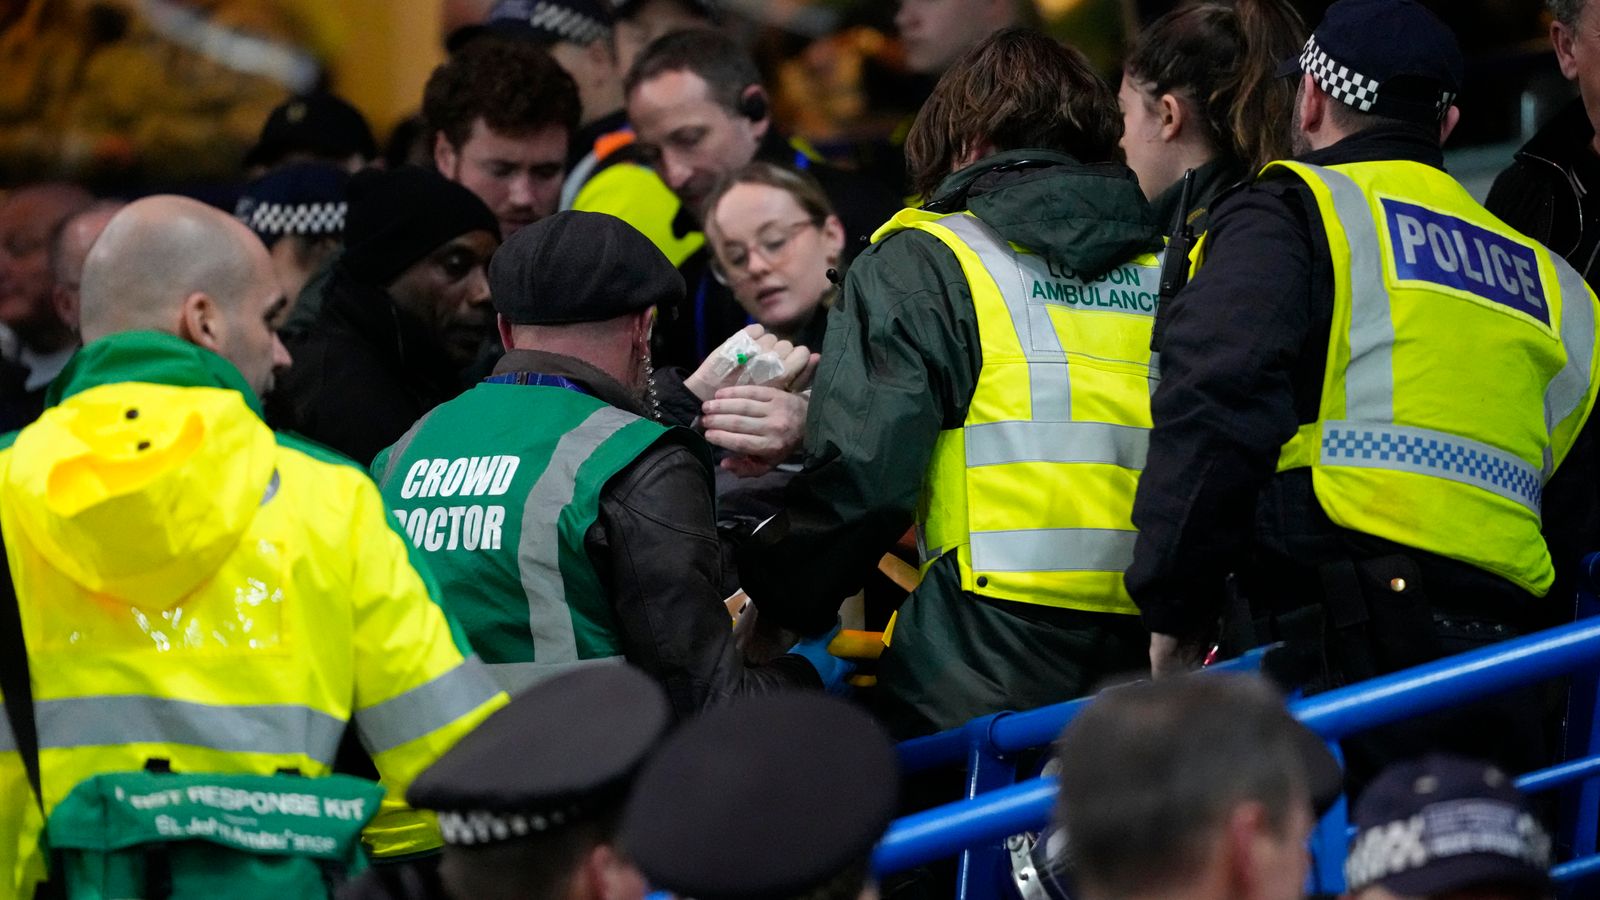 Leeds fan taken to hospital after falling from top tier of stand at Chelsea while celebrating goal